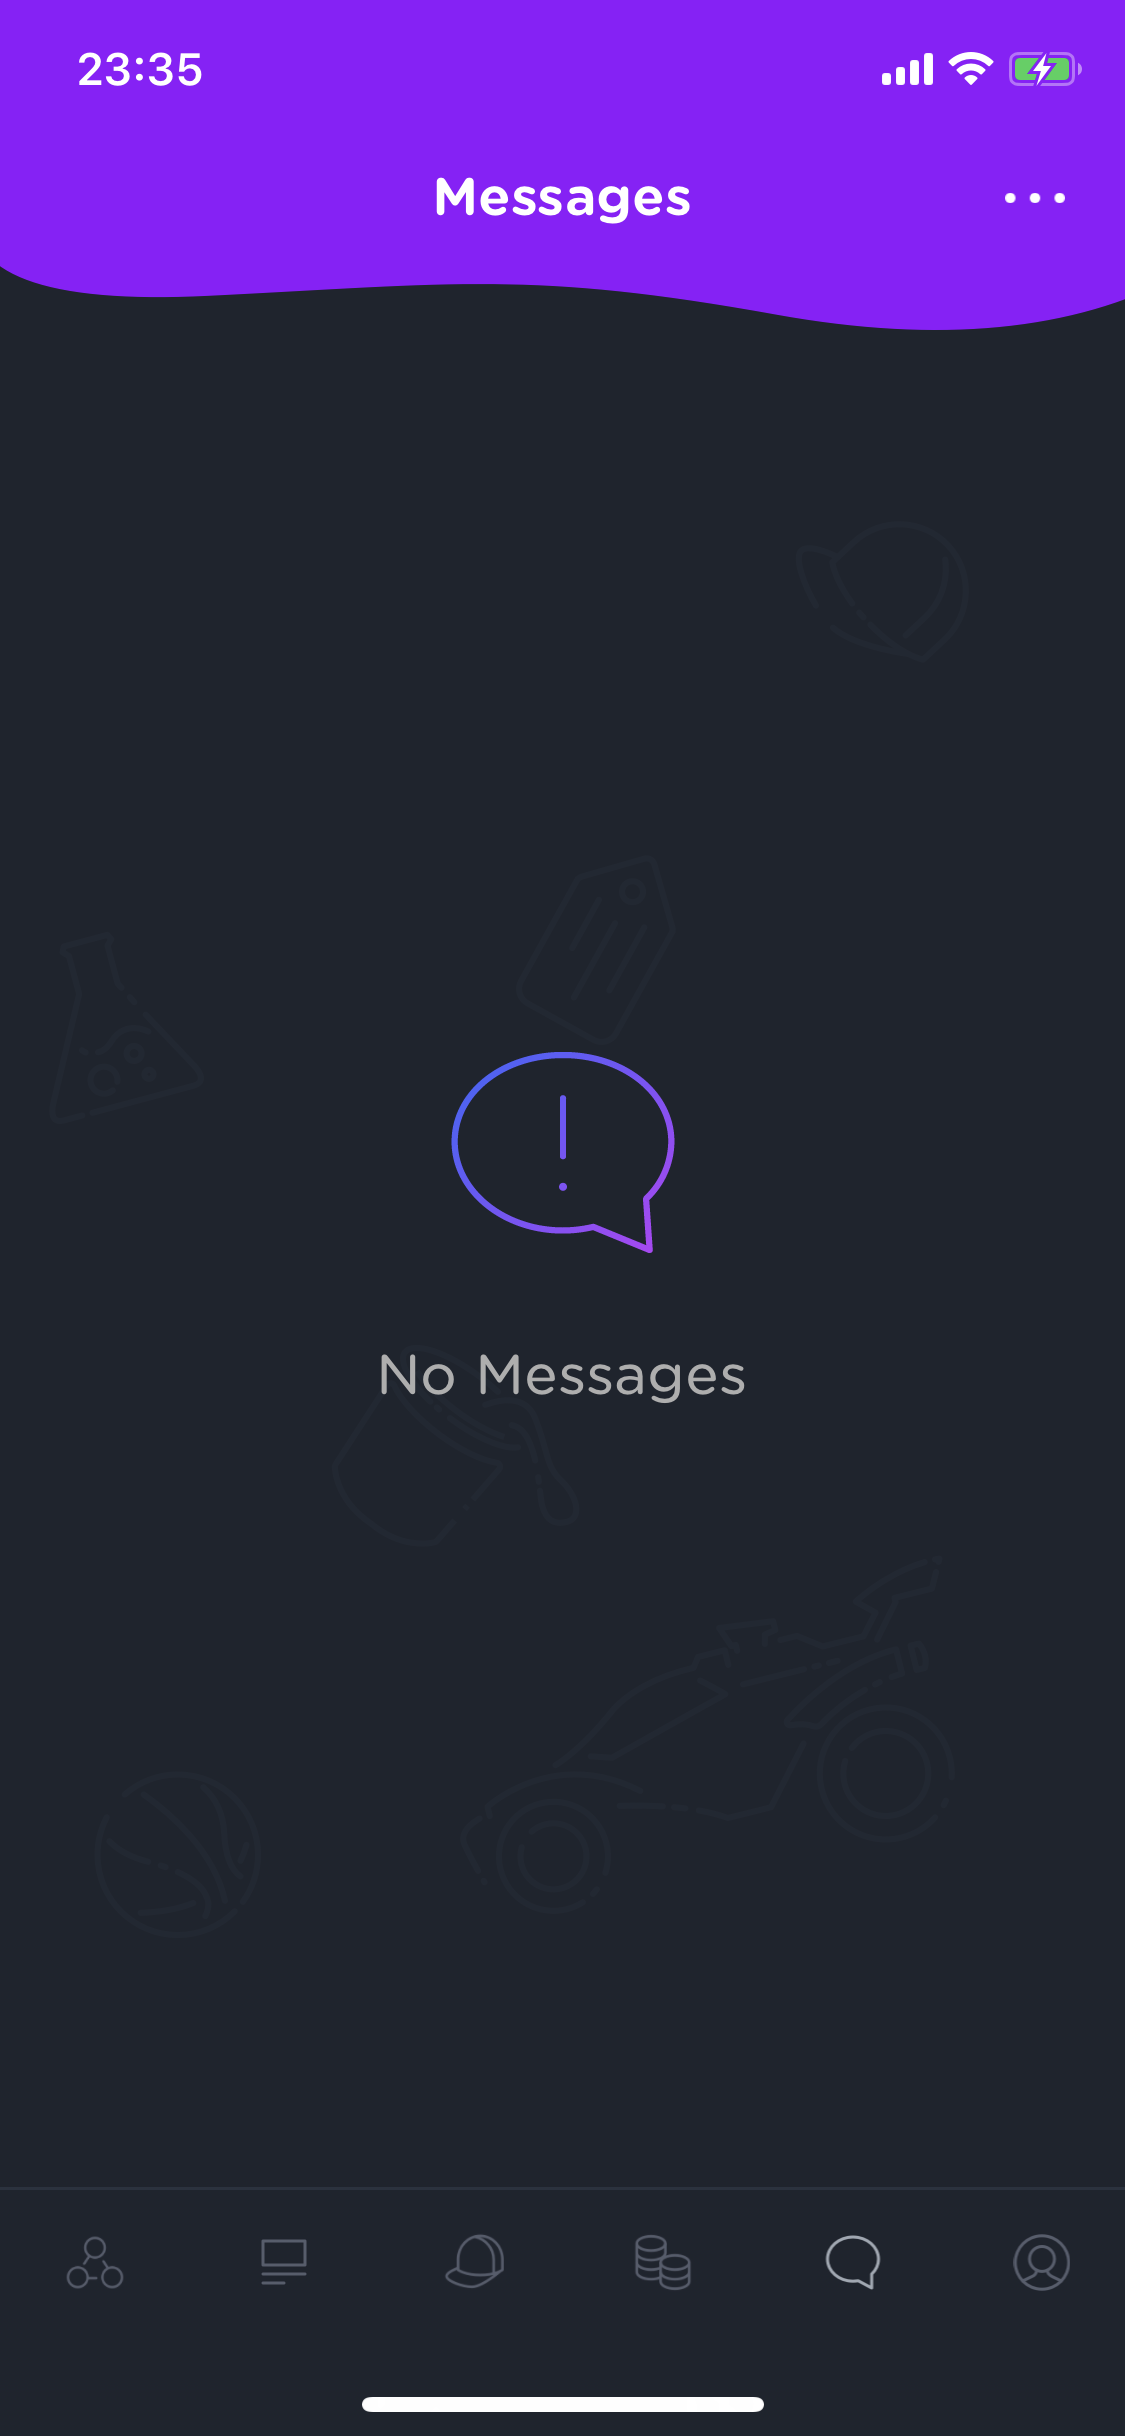 A bug in messages